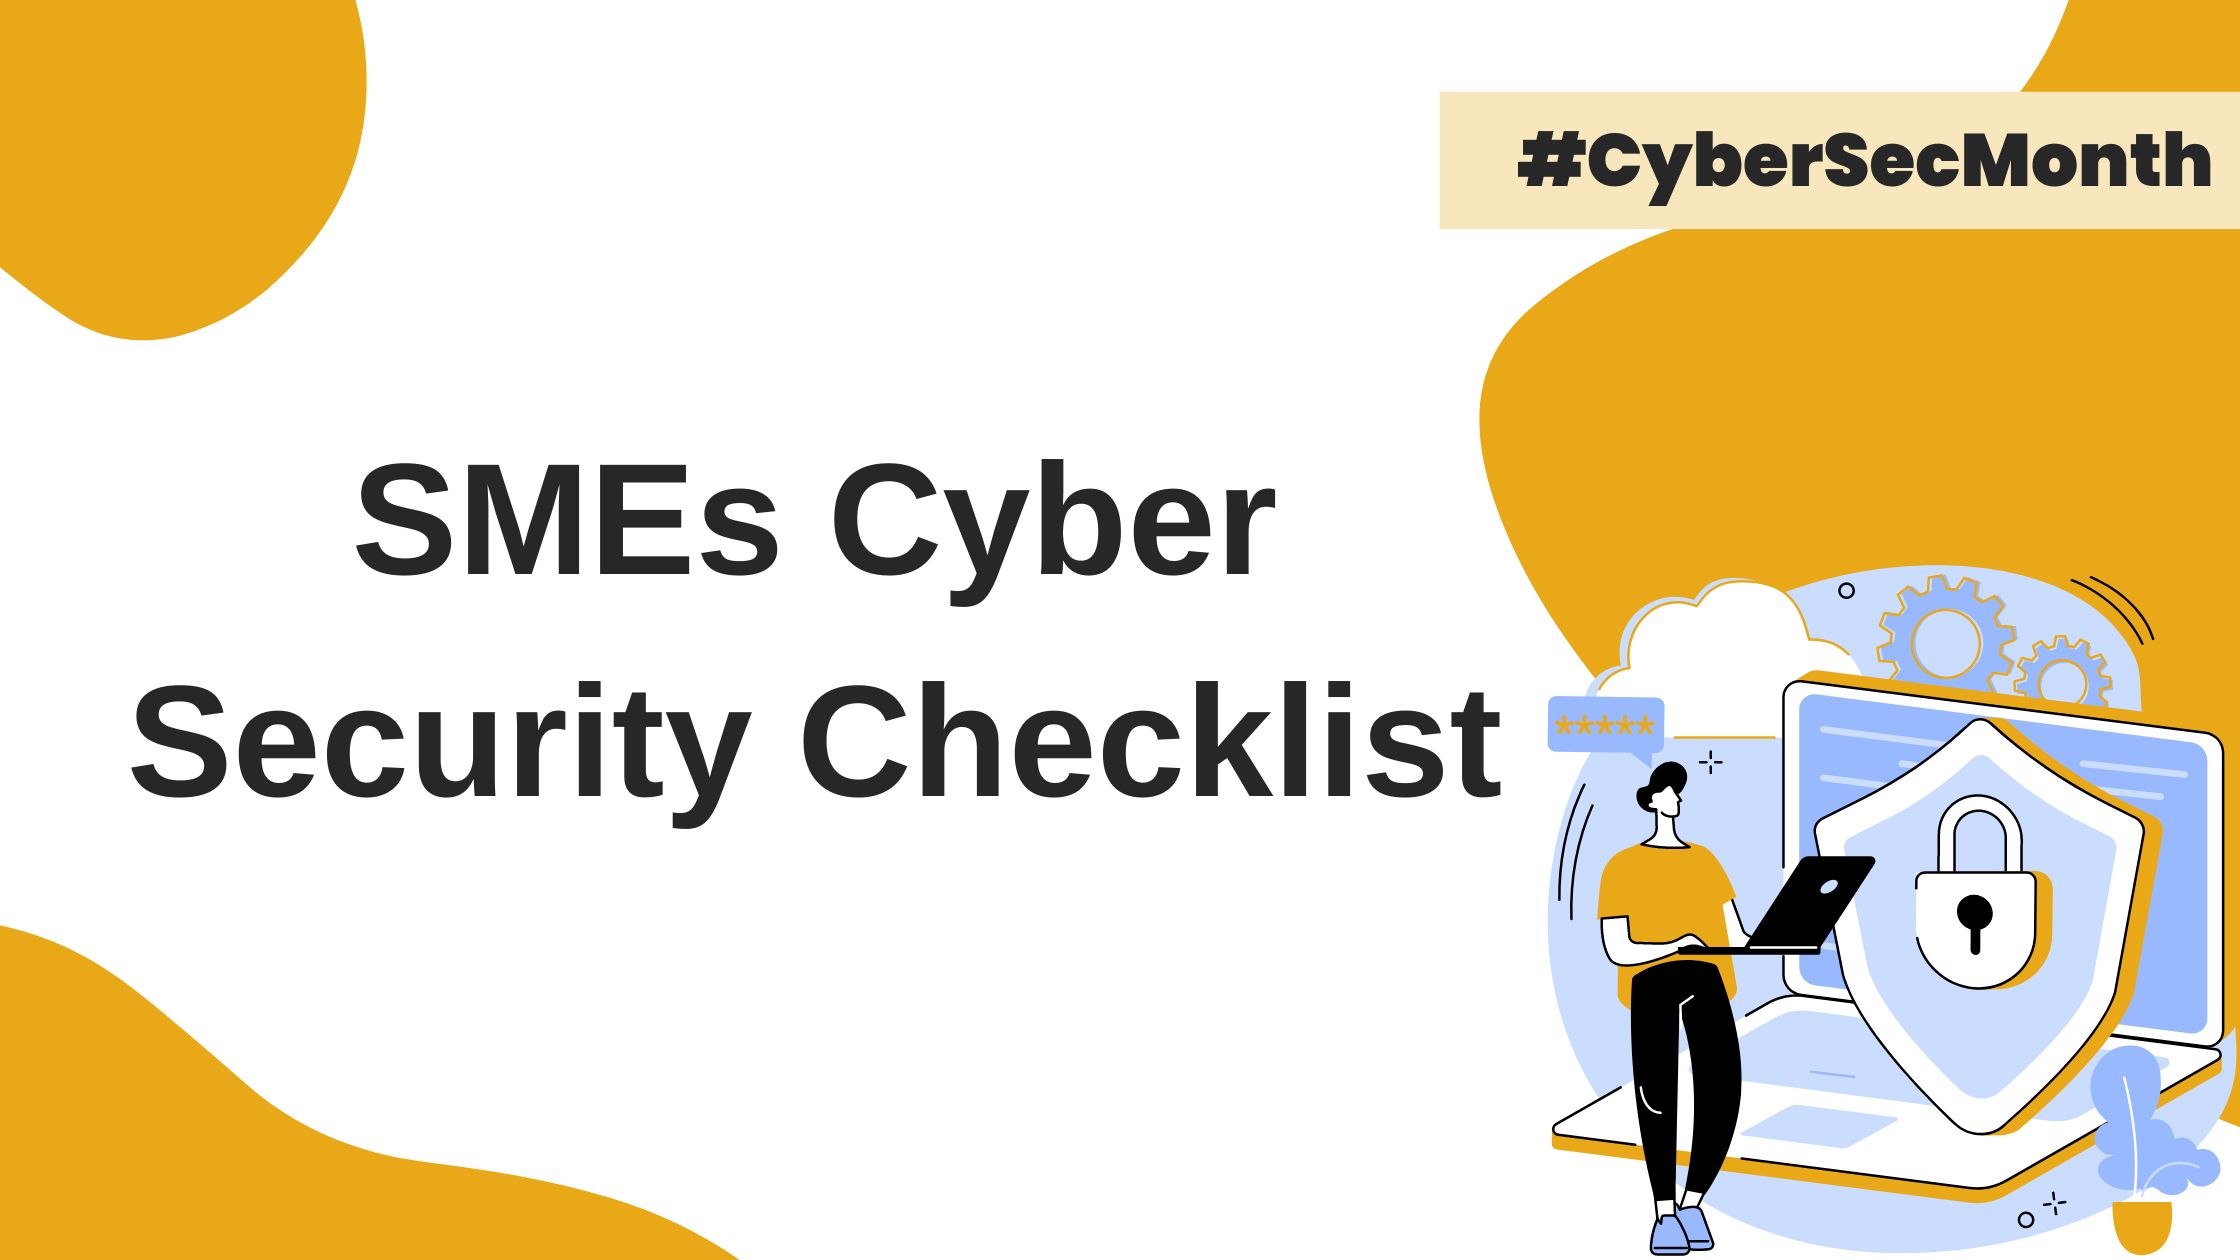 Cyber-Security Checklist for SME's